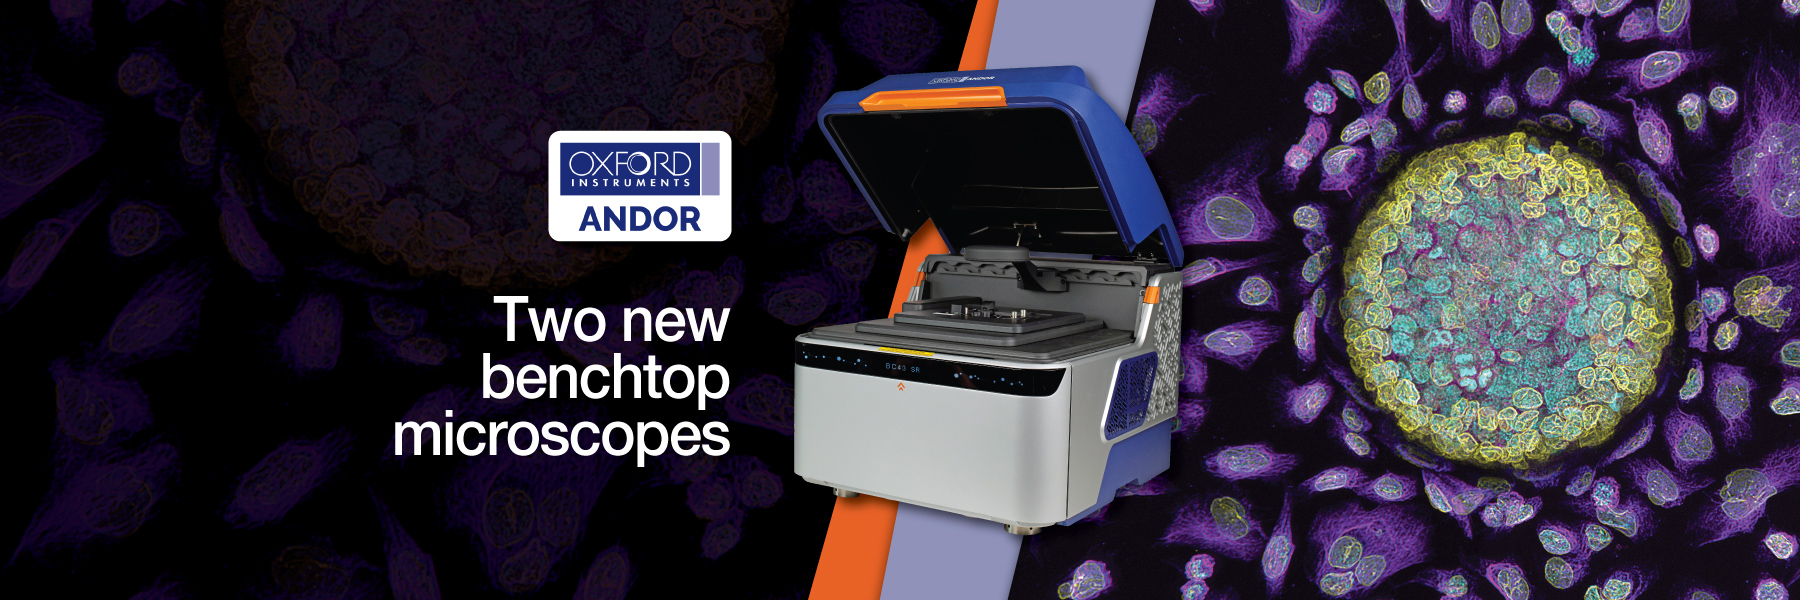 Oxford Andor Two New Microscopes